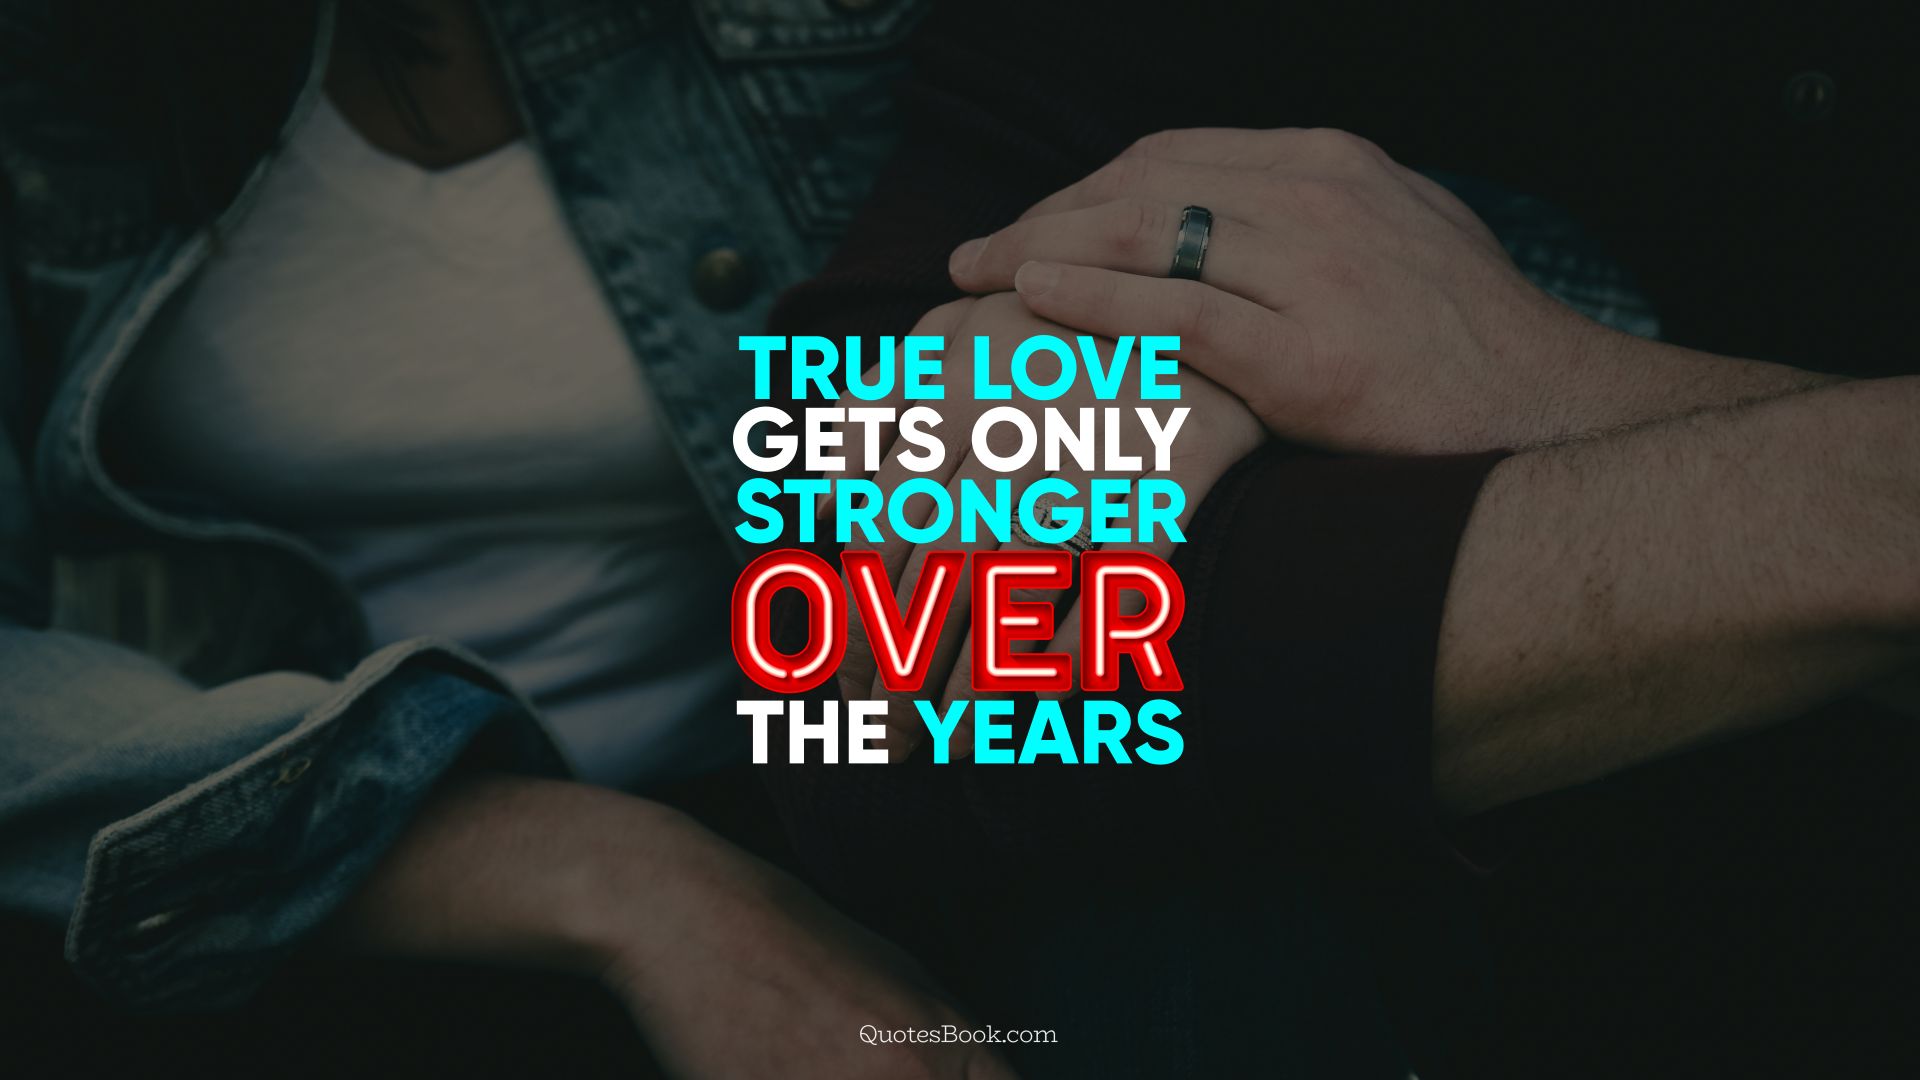 True love gets only stronger over the years. - Quote by QuotesBook